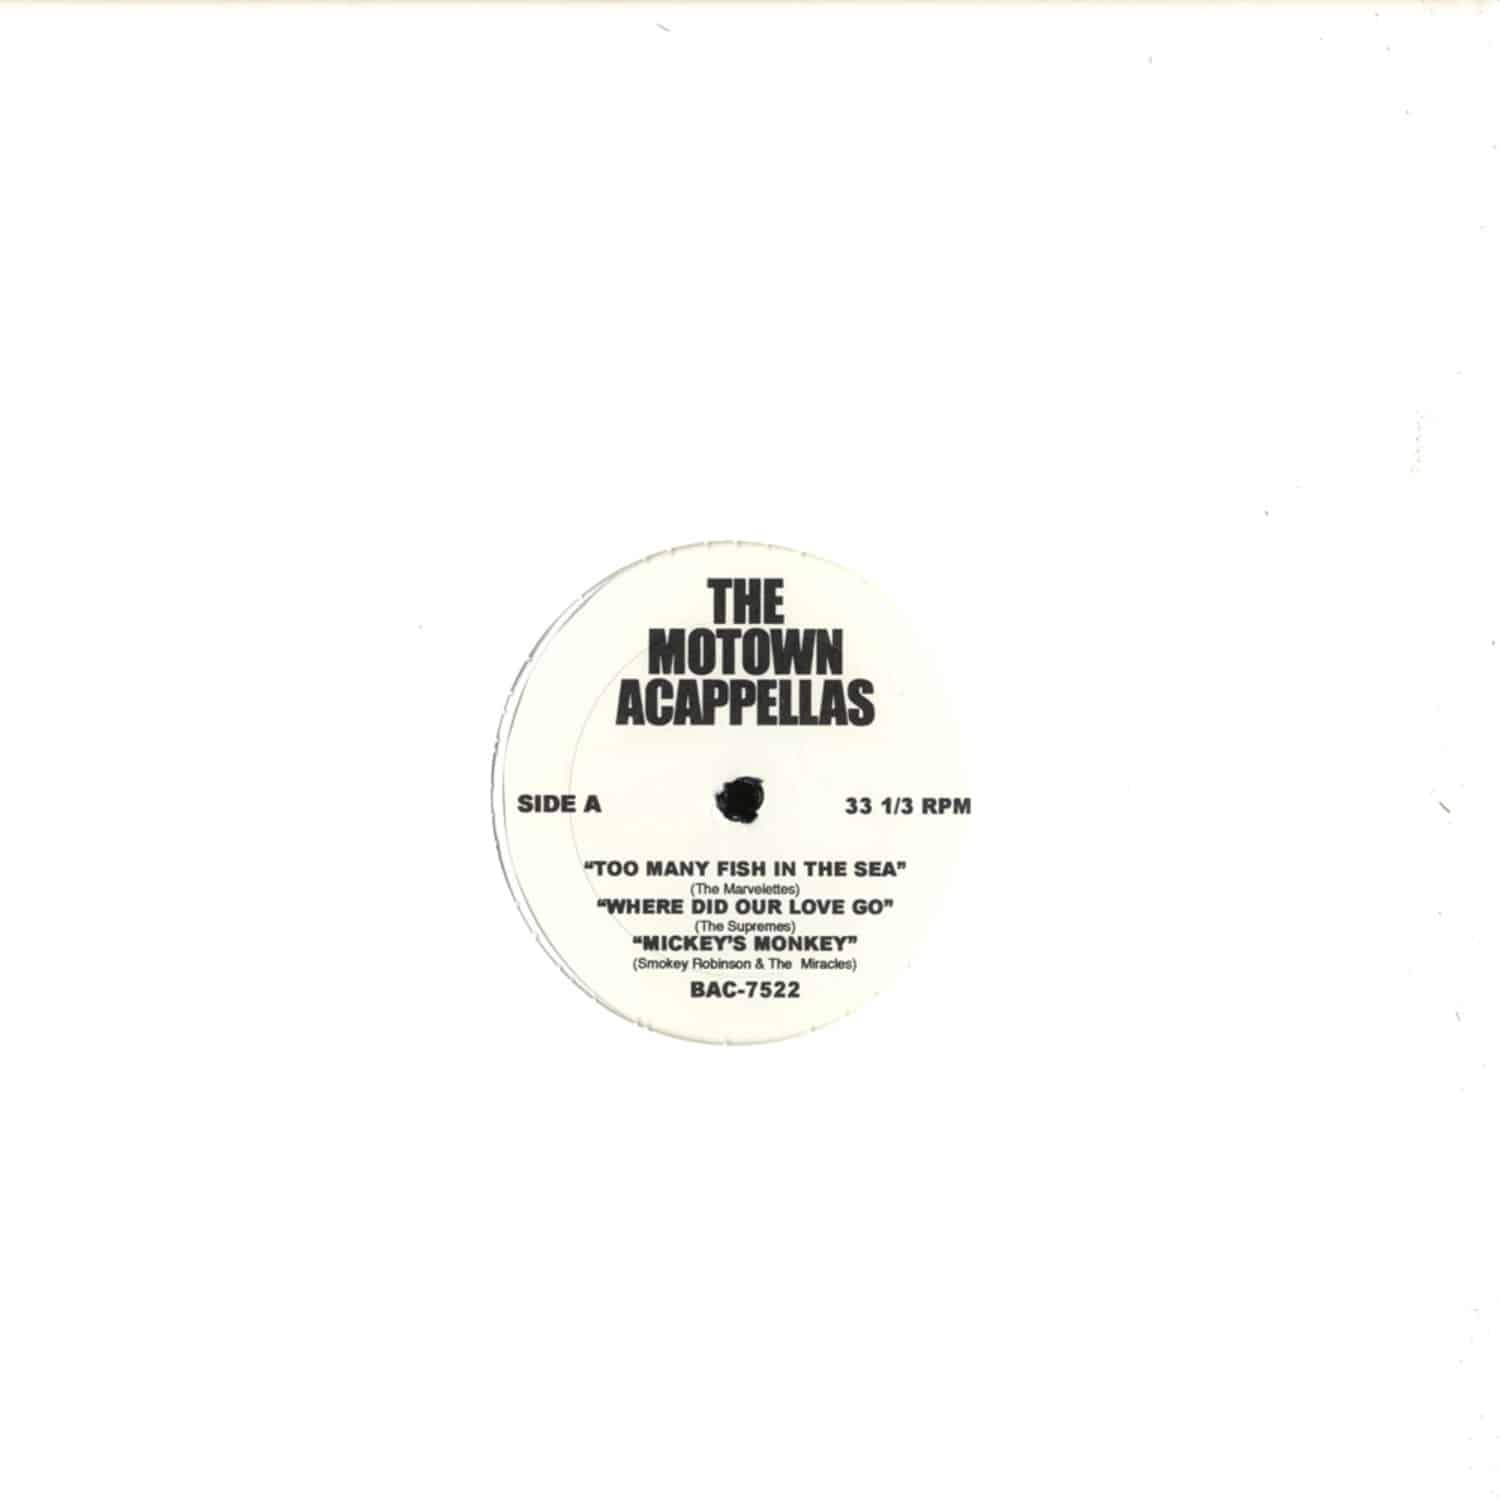 The Motown Acappellas - VARIOUS TRACKS